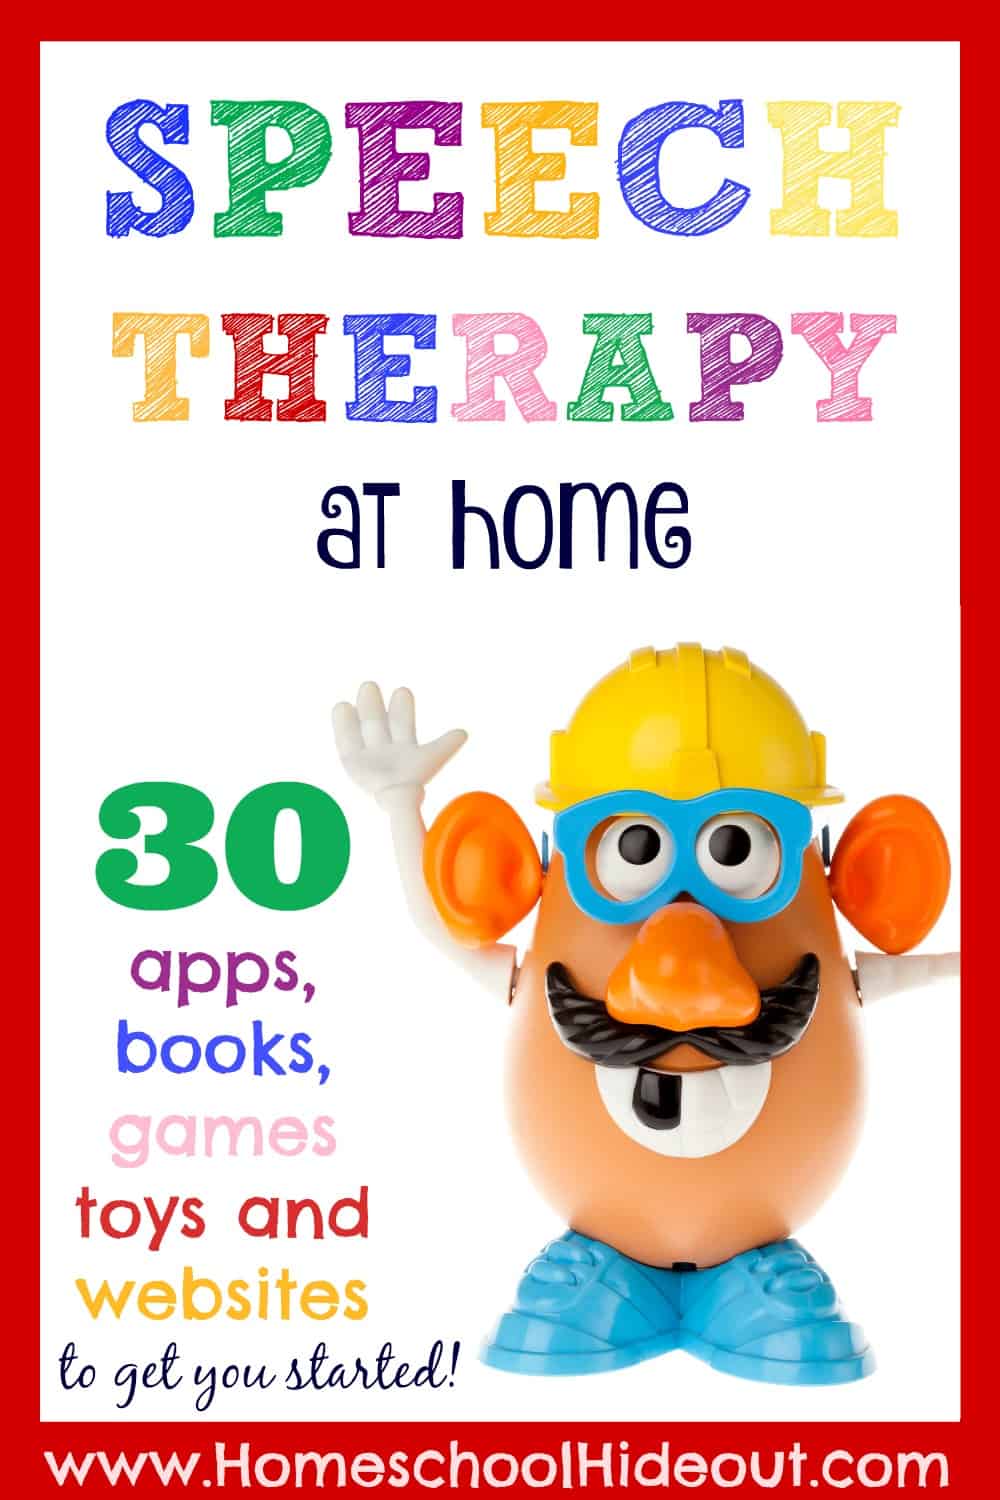 You CAN do speech therapy at home! Armed with this list of 30 resources, you can get started today.